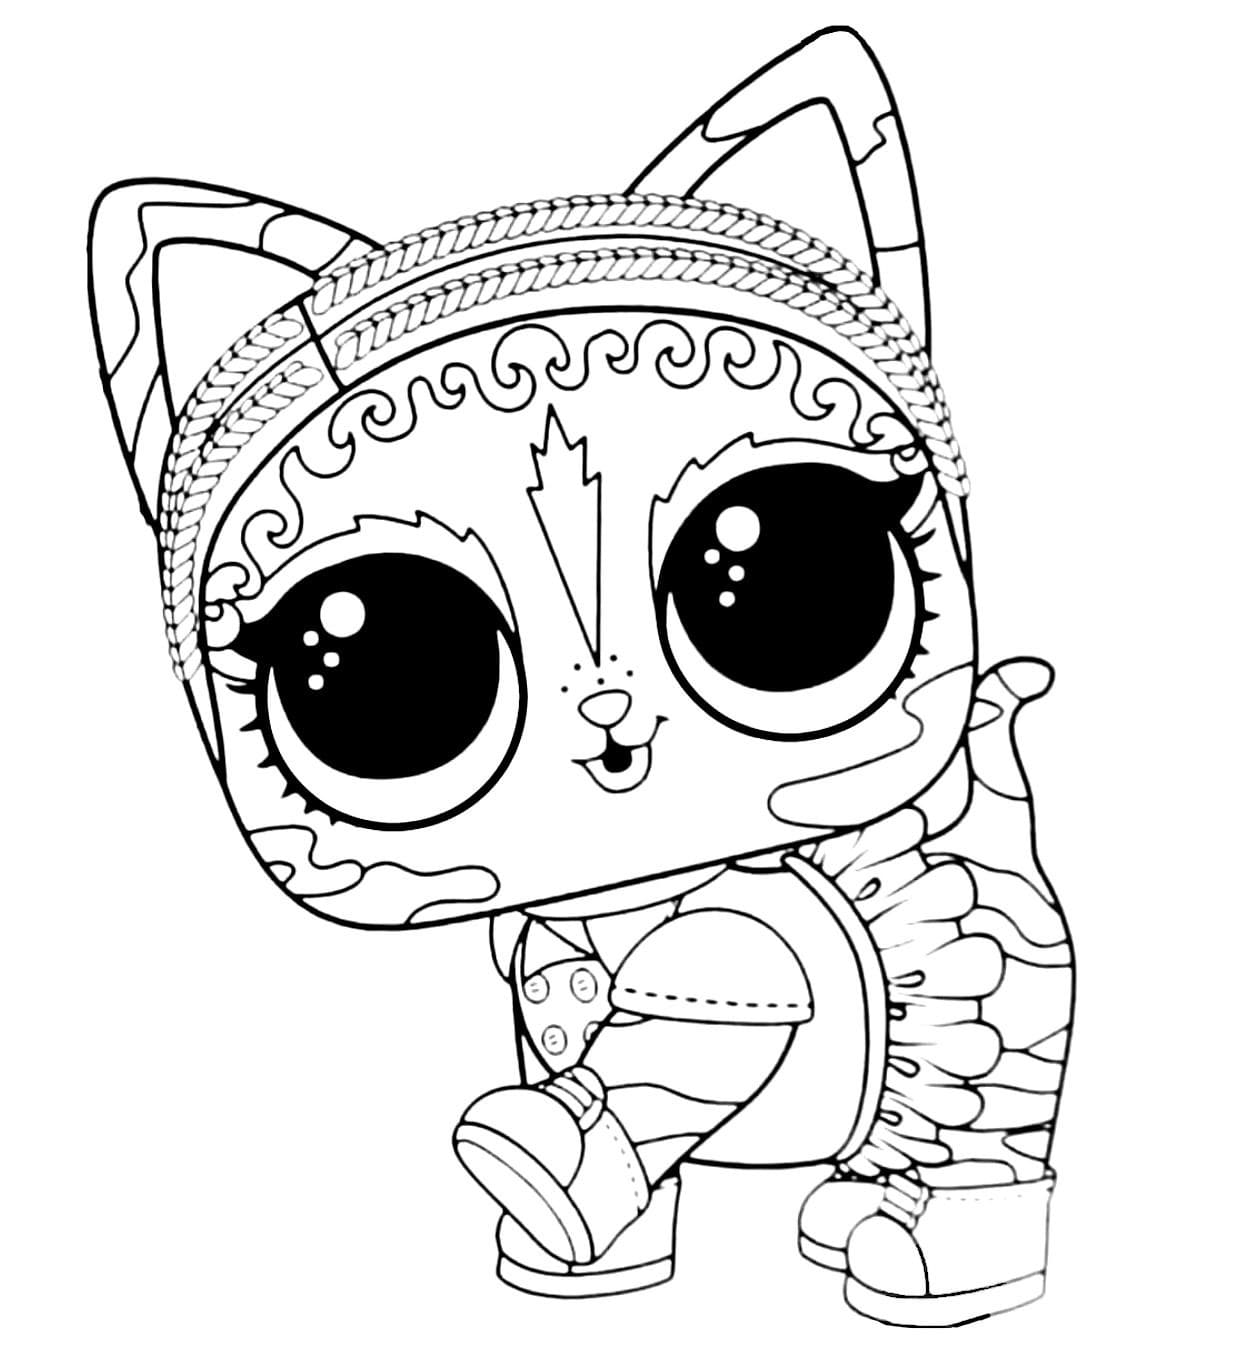 Agent Kitty LOL Surprise coloring page